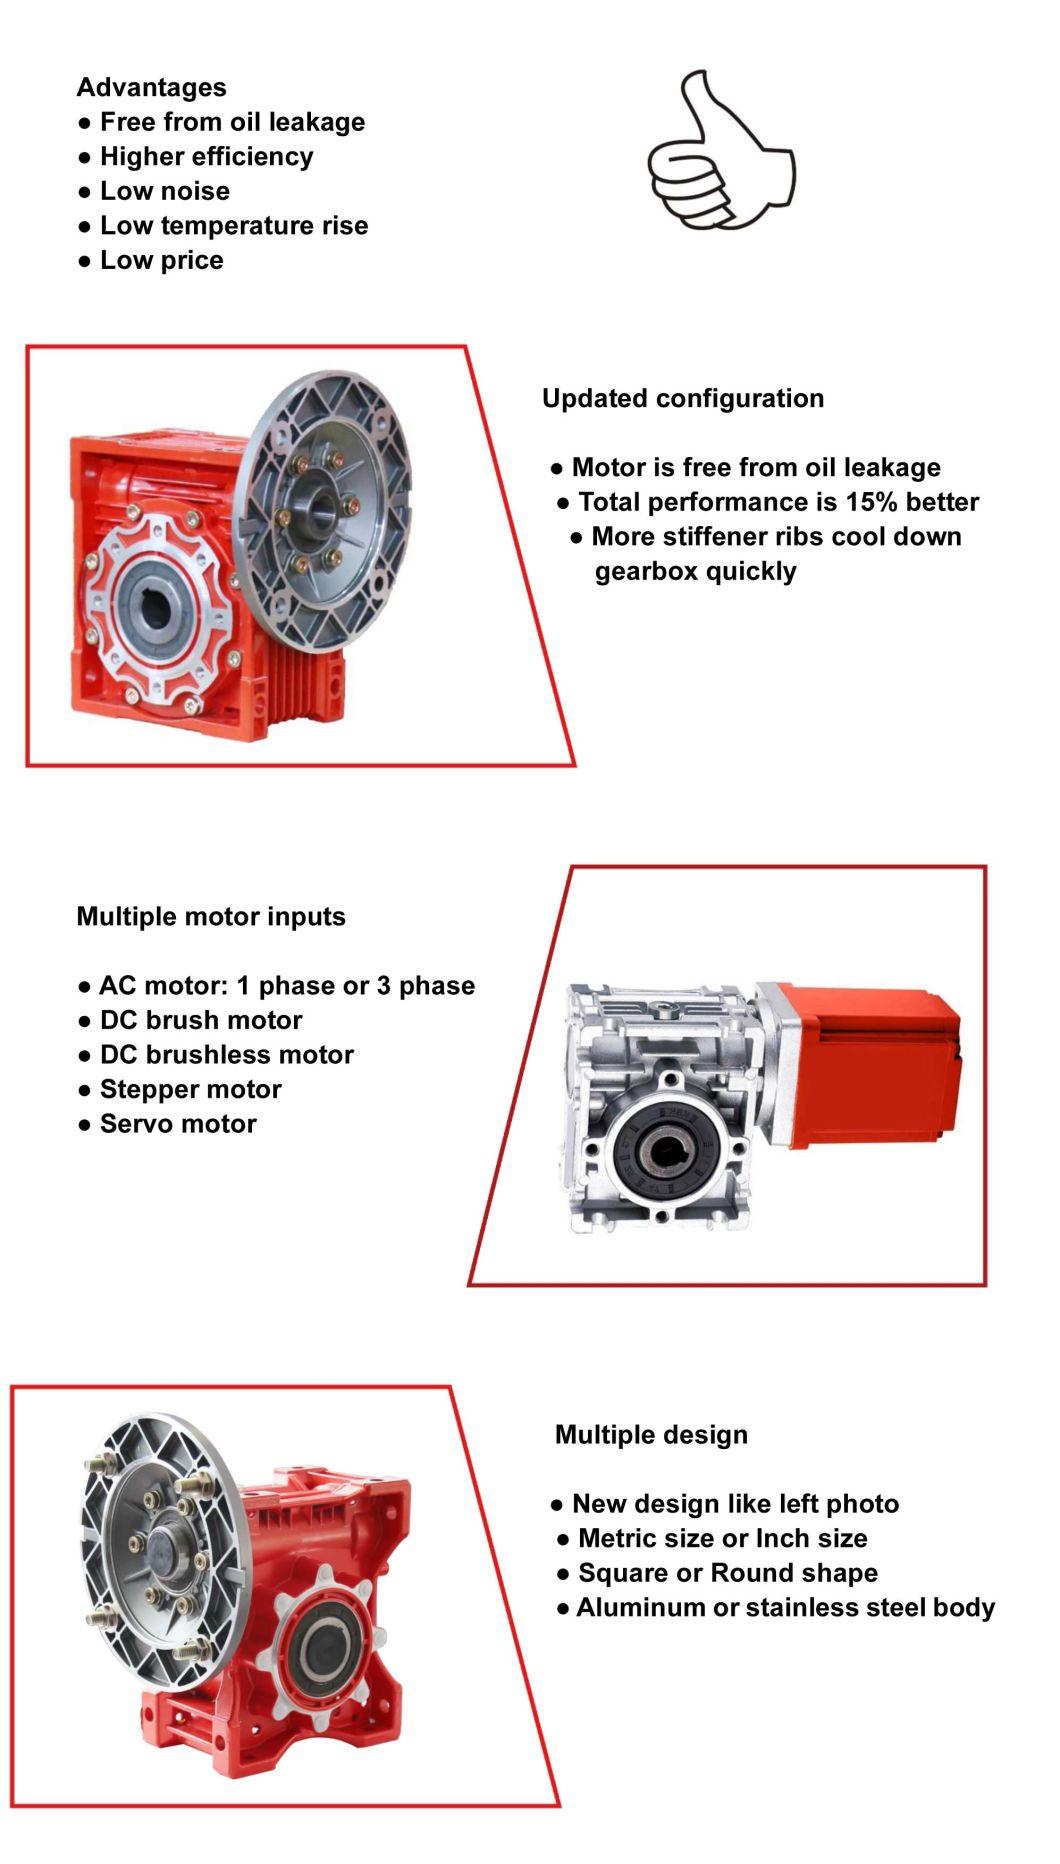 Right Angle Gearbox Hollow Solid Shaft Constant Speed Gear Reducer Motor for Conveyor Equipment Packing Machine